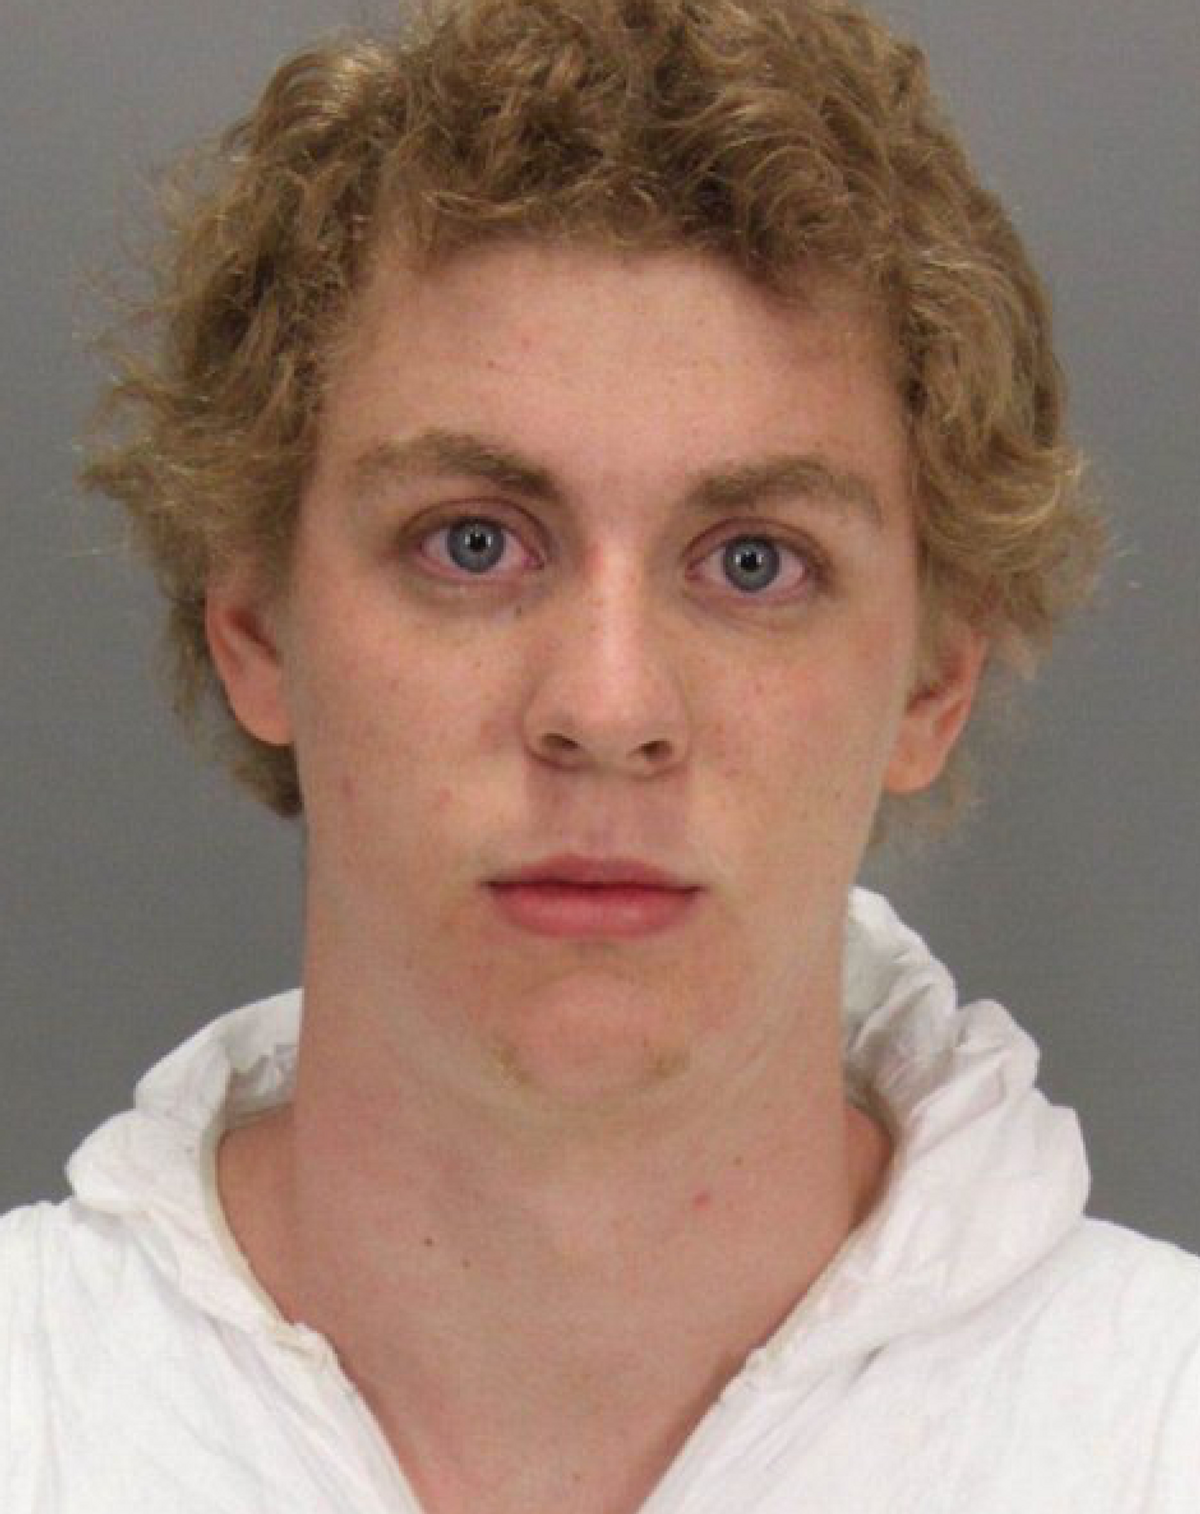 Stanford Rapist Brock Turner Banned For Life By USA Swimming